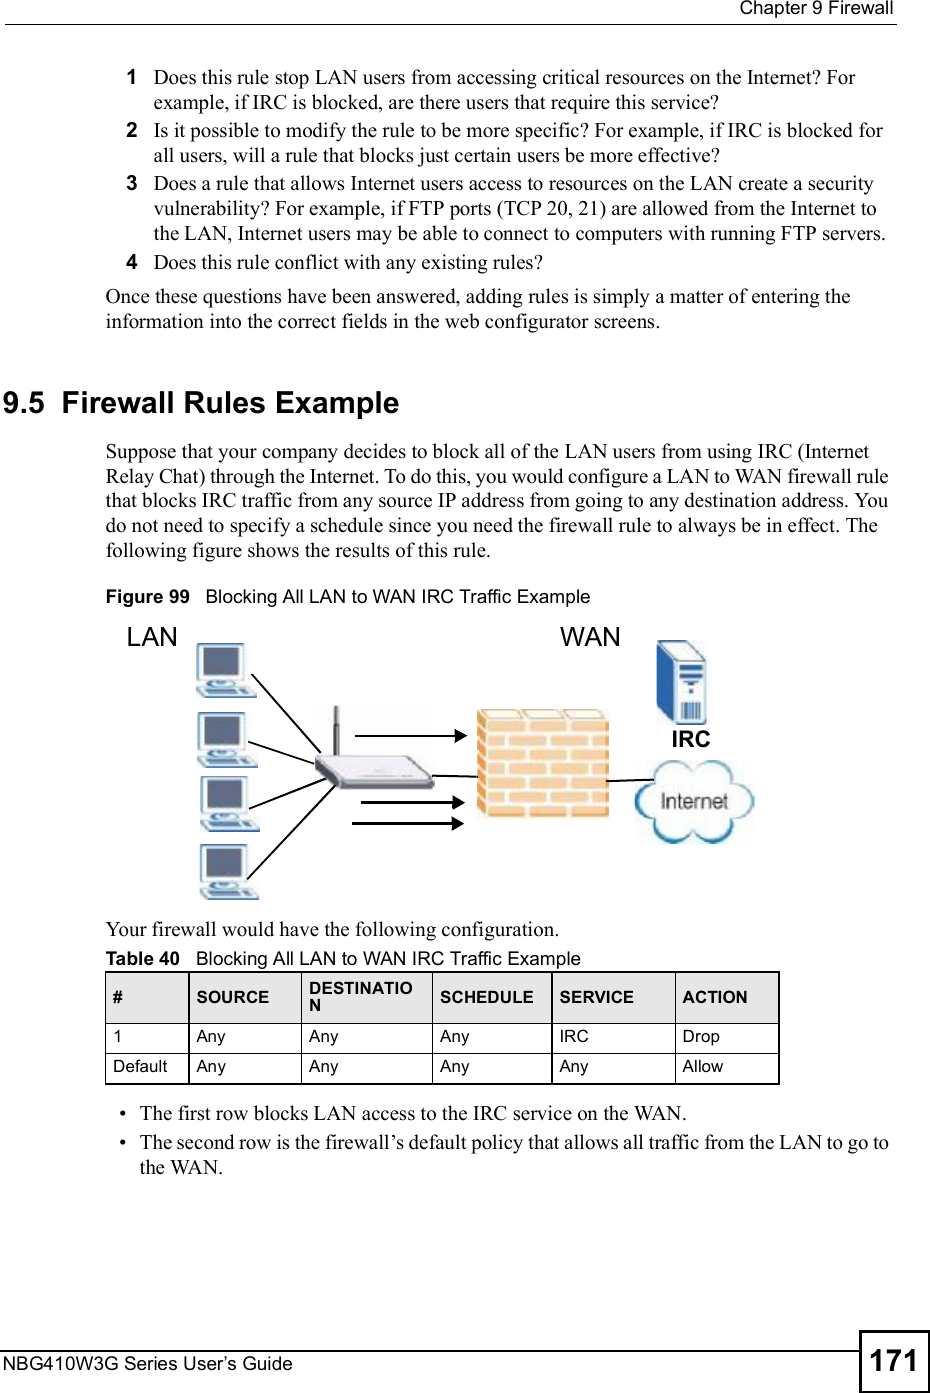  Chapter 9FirewallNBG410W3G Series User s Guide 1711Does this rule stop LAN users from accessing critical resources on the Internet? For example, if IRC is blocked, are there users that require this service?2Is it possible to modify the rule to be more specific? For example, if IRC is blocked for all users, will a rule that blocks just certain users be more effective?3Does a rule that allows Internet users access to resources on the LAN create a security vulnerability? For example, if FTP ports (TCP 20, 21) are allowed from the Internet to the LAN, Internet users may be able to connect to computers with running FTP servers.4Does this rule conflict with any existing rules?Once these questions have been answered, adding rules is simply a matter of entering the information into the correct fields in the web configurator screens.9.5  Firewall Rules ExampleSuppose that your company decides to block all of the LAN users from using IRC (Internet Relay Chat) through the Internet. To do this, you would configure a LAN to WAN firewall rule that blocks IRC traffic from any source IP address from going to any destination address. You do not need to specify a schedule since you need the firewall rule to always be in effect. The following figure shows the results of this rule.Figure 99   Blocking All LAN to WAN IRC Traffic Example Your firewall would have the following configuration.   The first row blocks LAN access to the IRC service on the WAN.  The second row is the firewall!s default policy that allows all traffic from the LAN to go to the WAN.Table 40   Blocking All LAN to WAN IRC Traffic Example #SOURCE DESTINATIONSCHEDULE SERVICE ACTION1AnyAnyAnyIRCDropDefaultAnyAnyAnyAnyAllowLANWANIRC